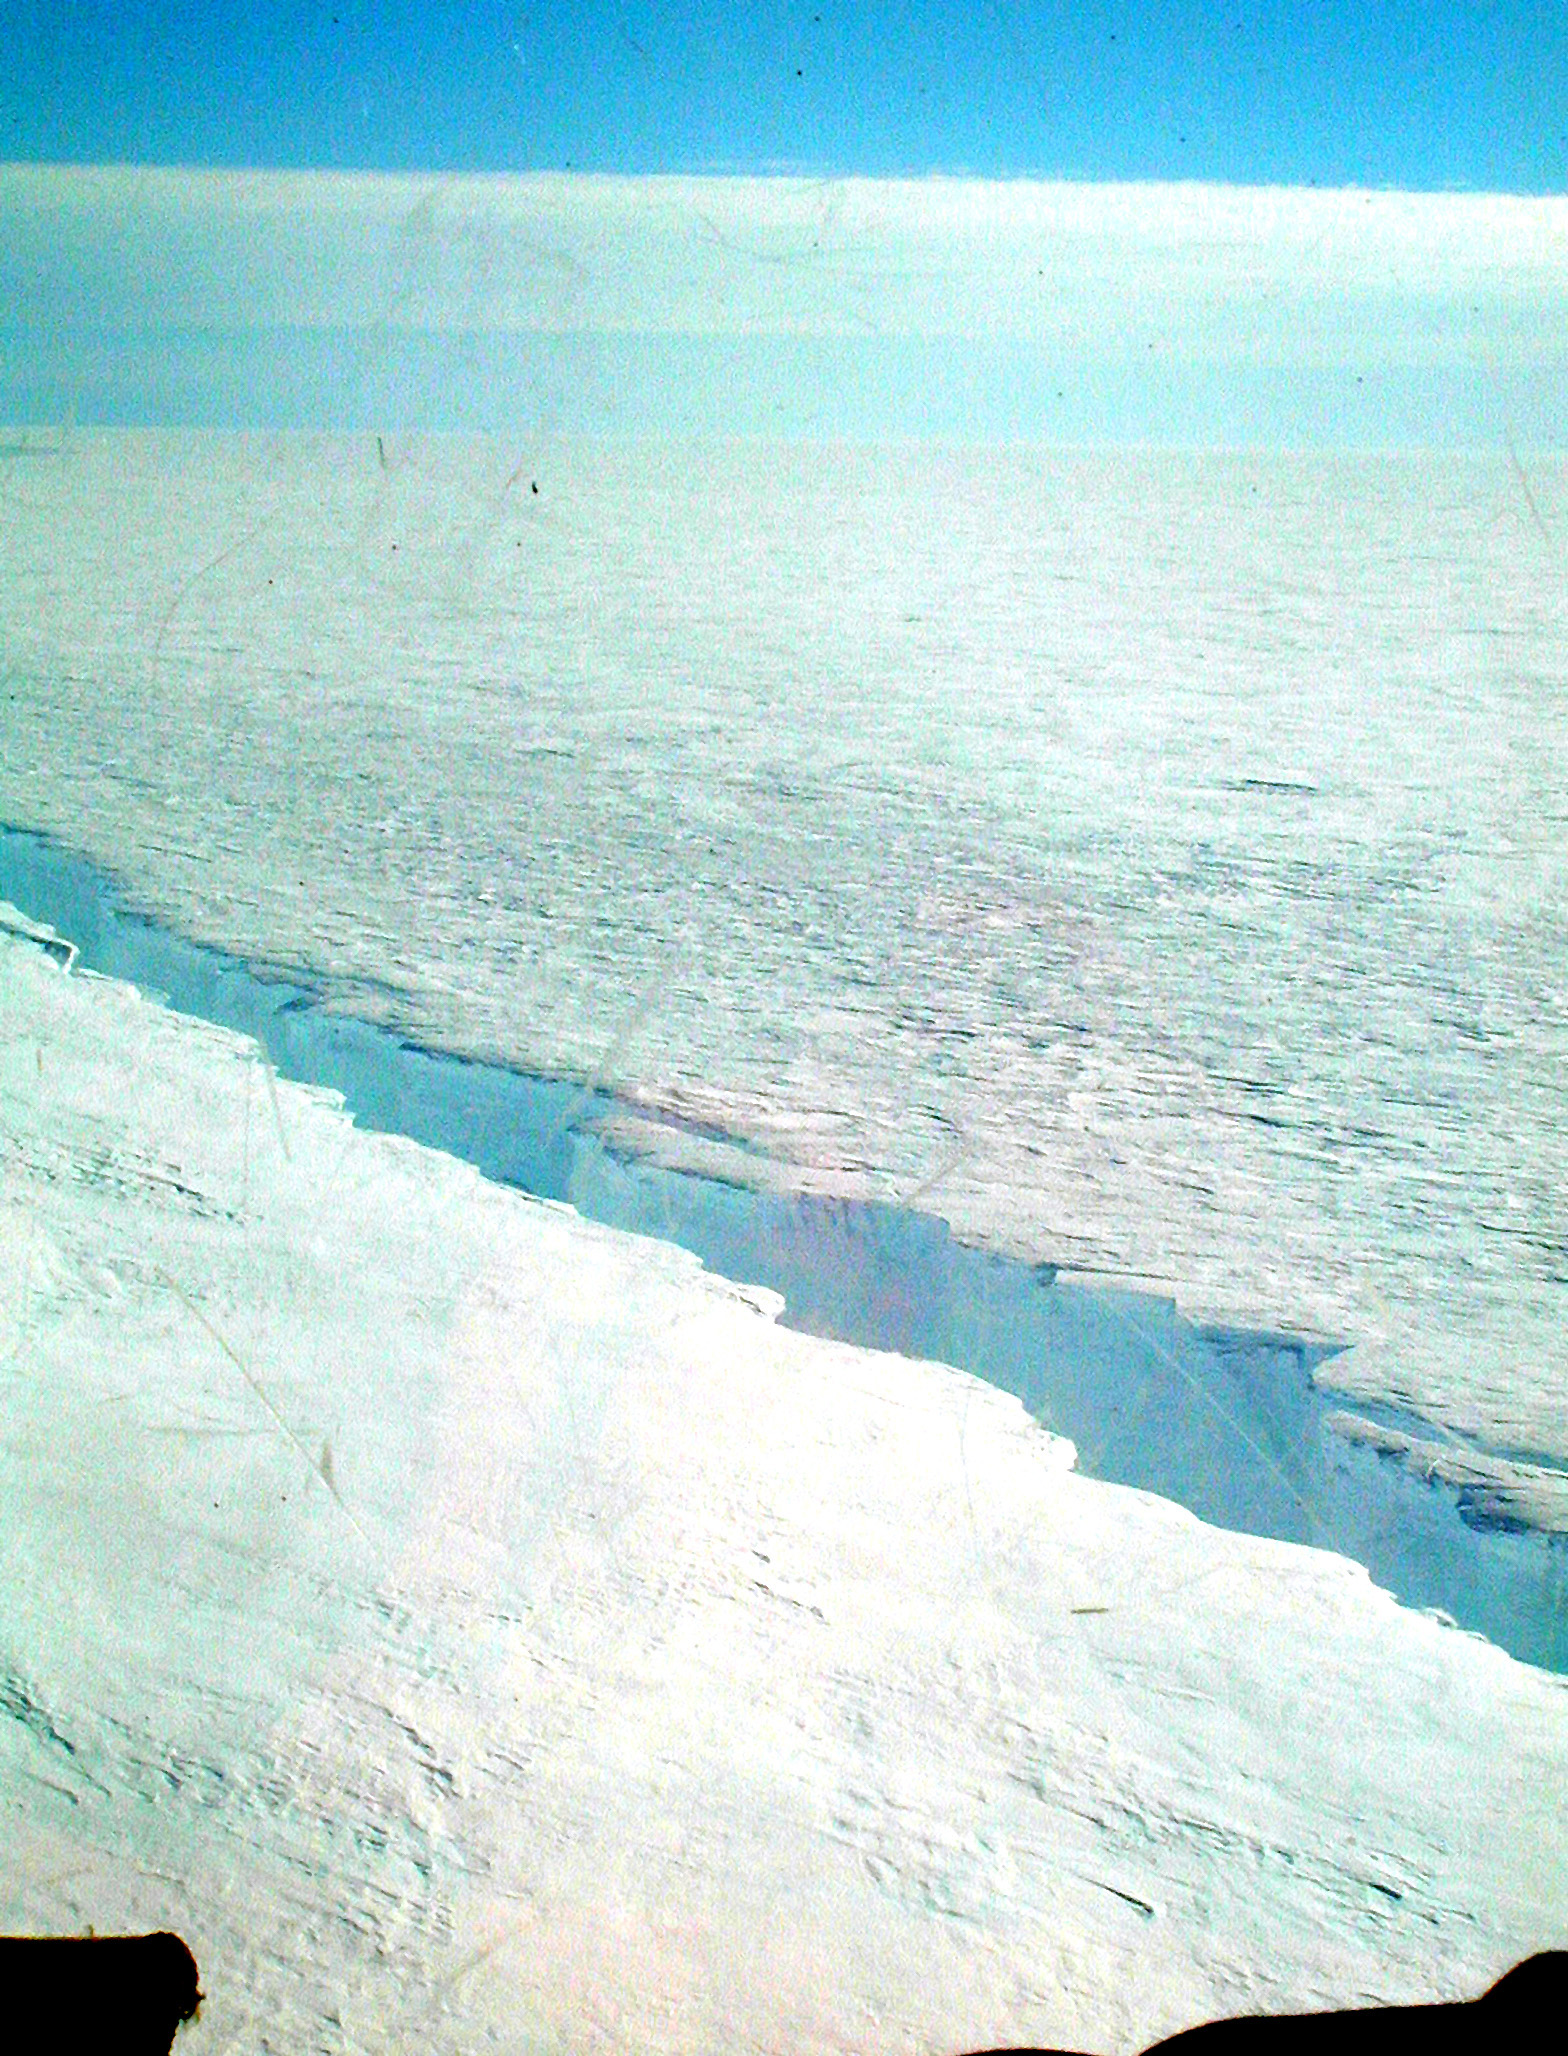 Photo of crack forming in iceberg